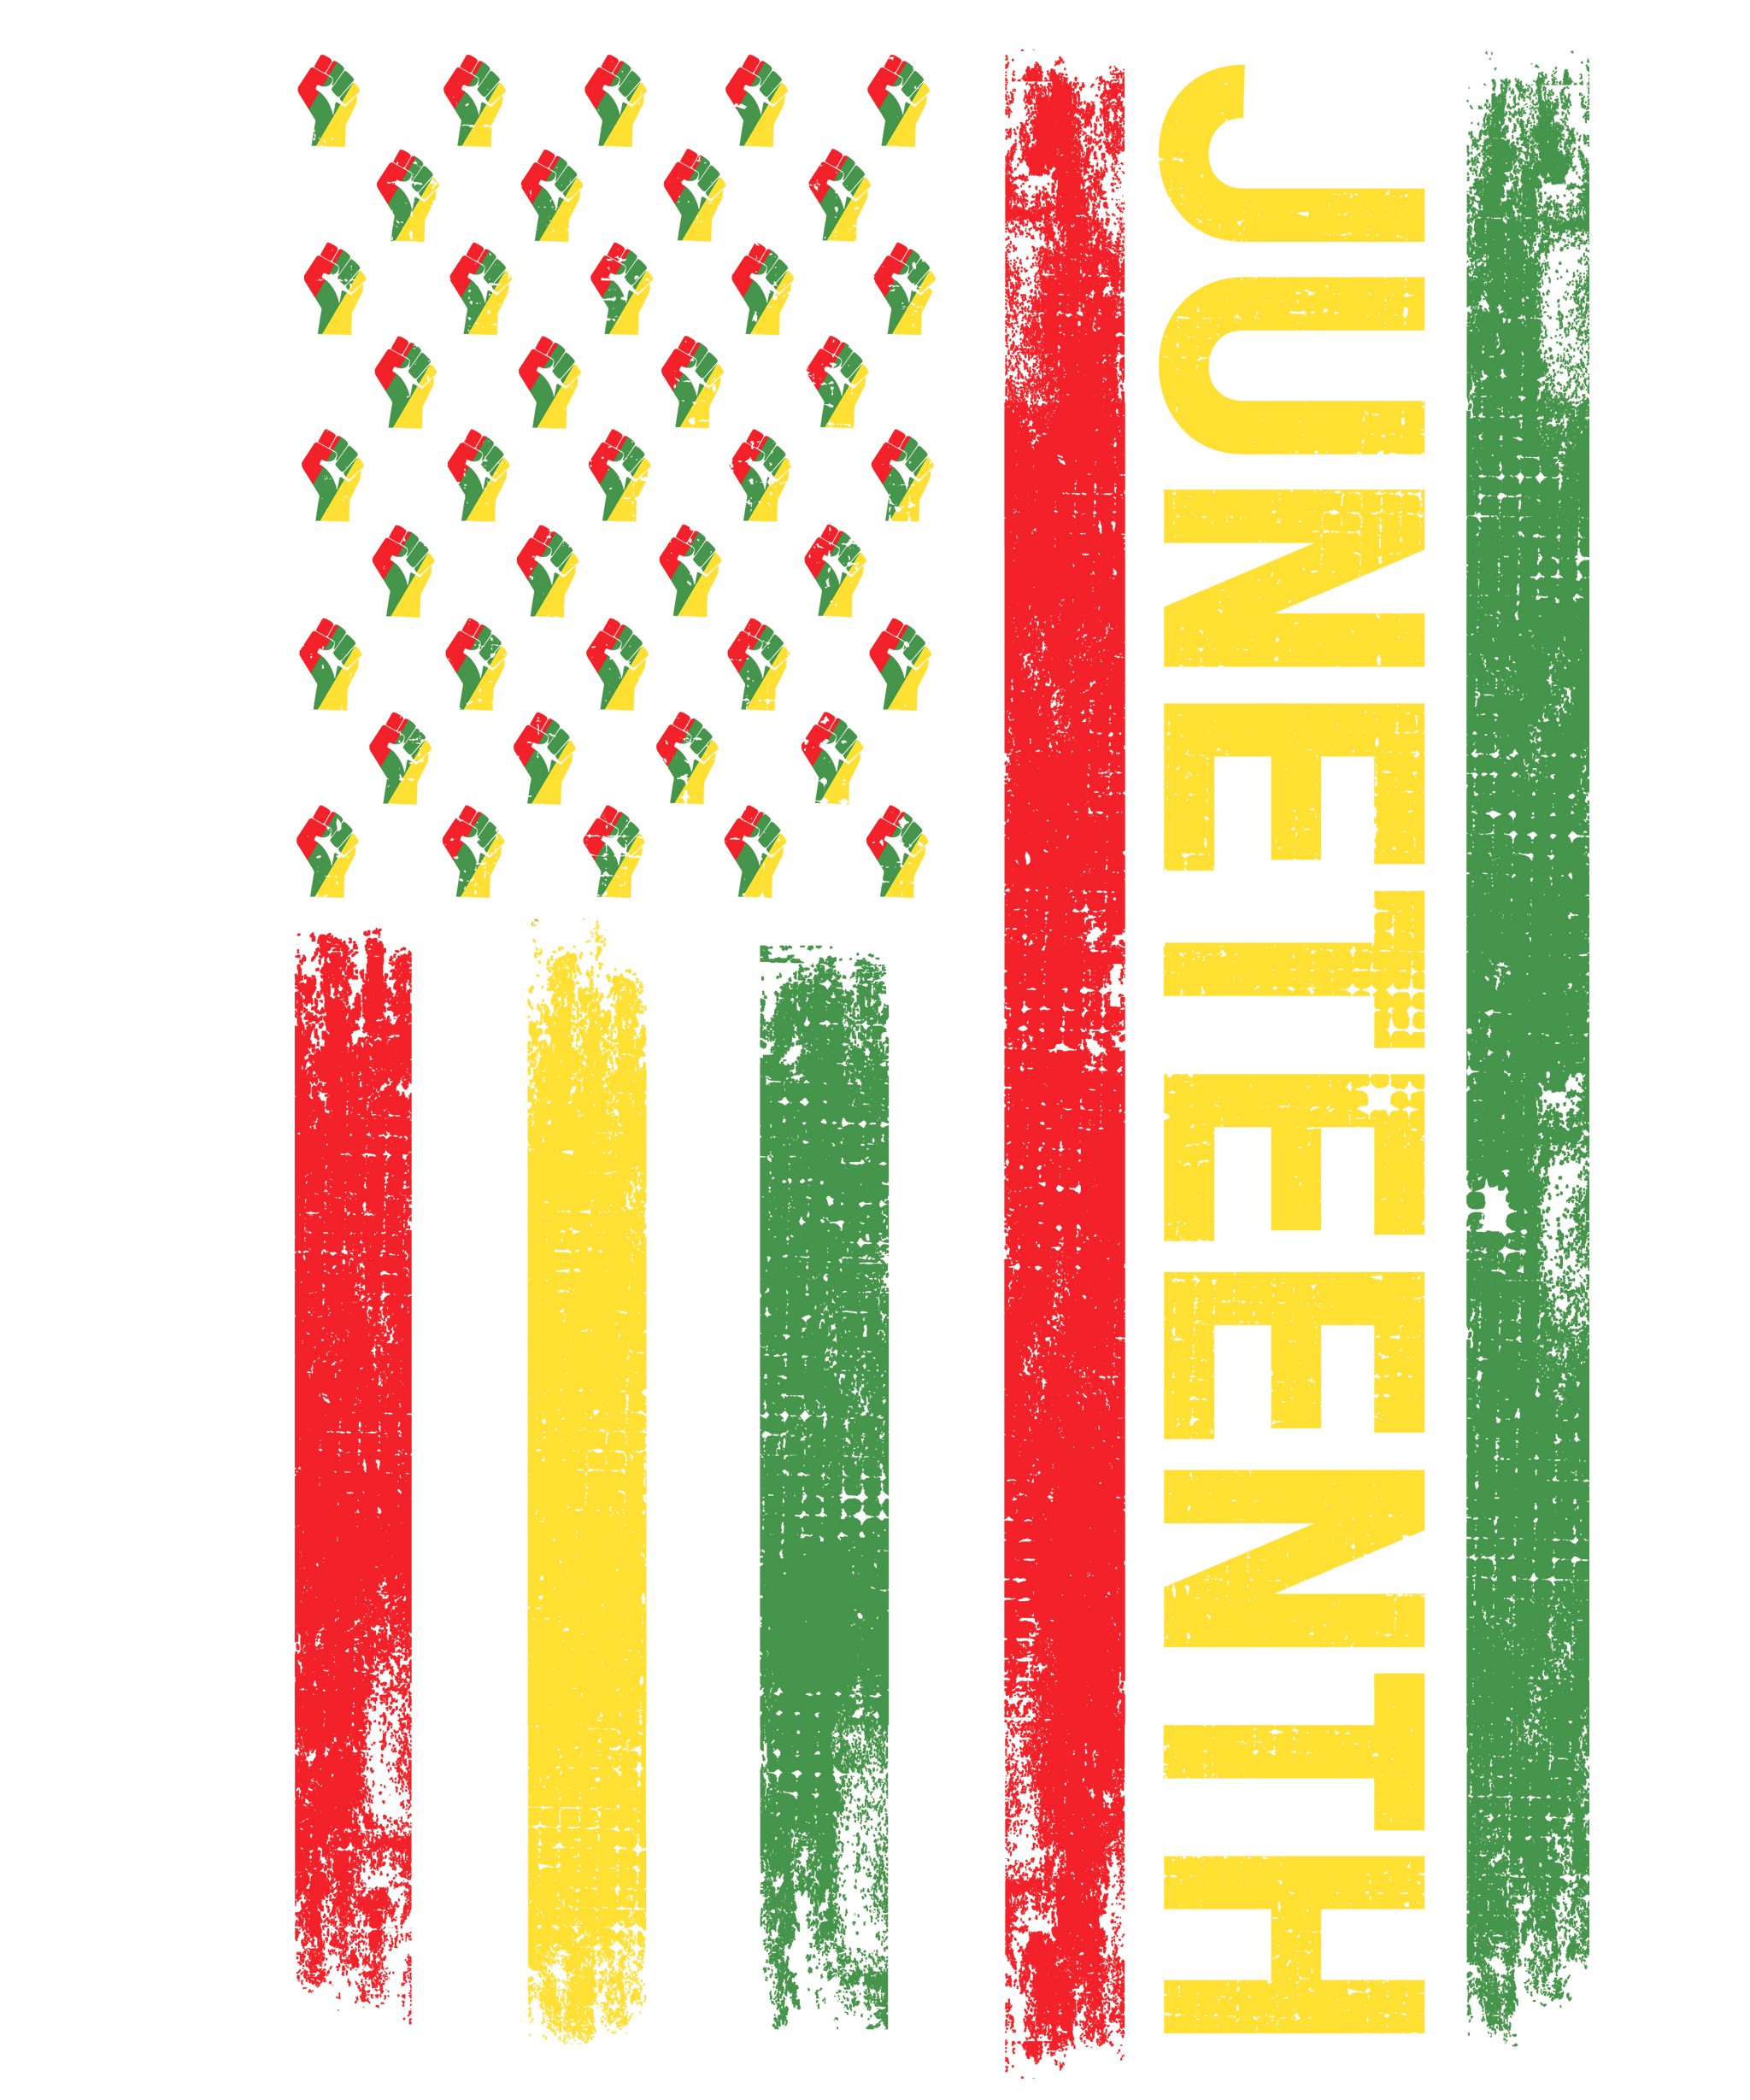 Juneteenth T-Shirts 2X and Up  (Unisex)